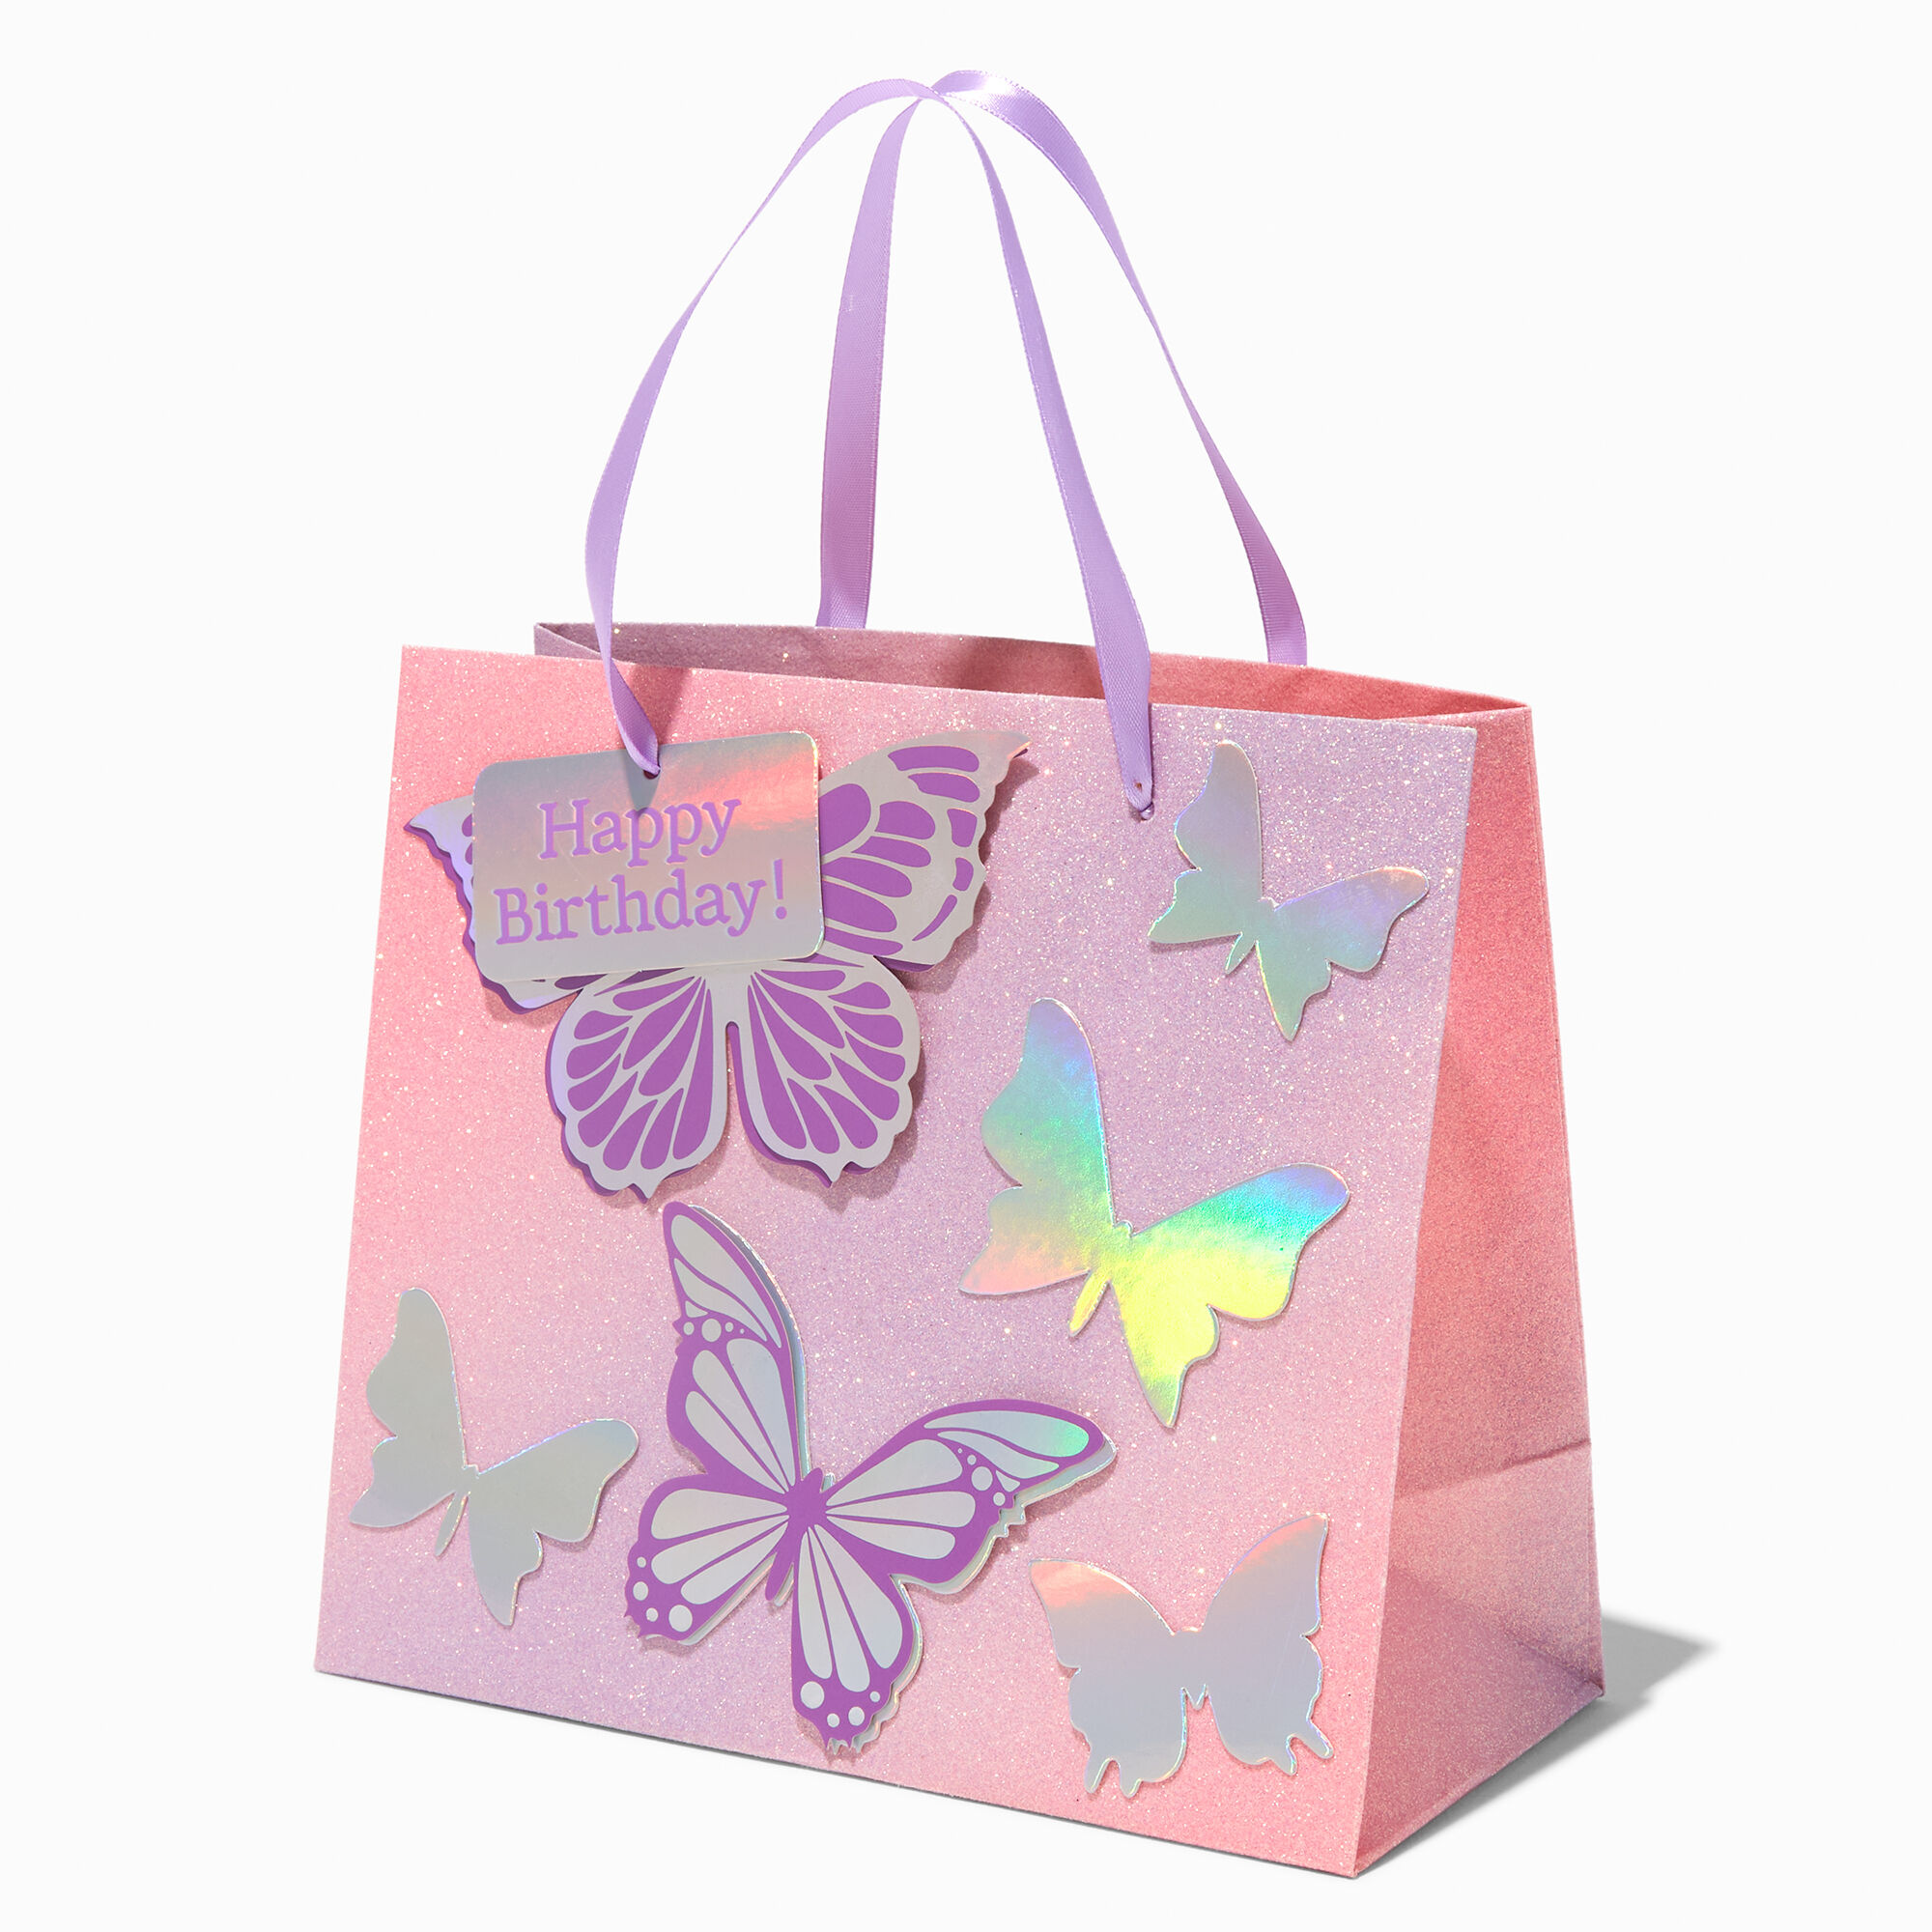 View Claires Happy Birthday 3D Butterfly Gift Bag Medium information